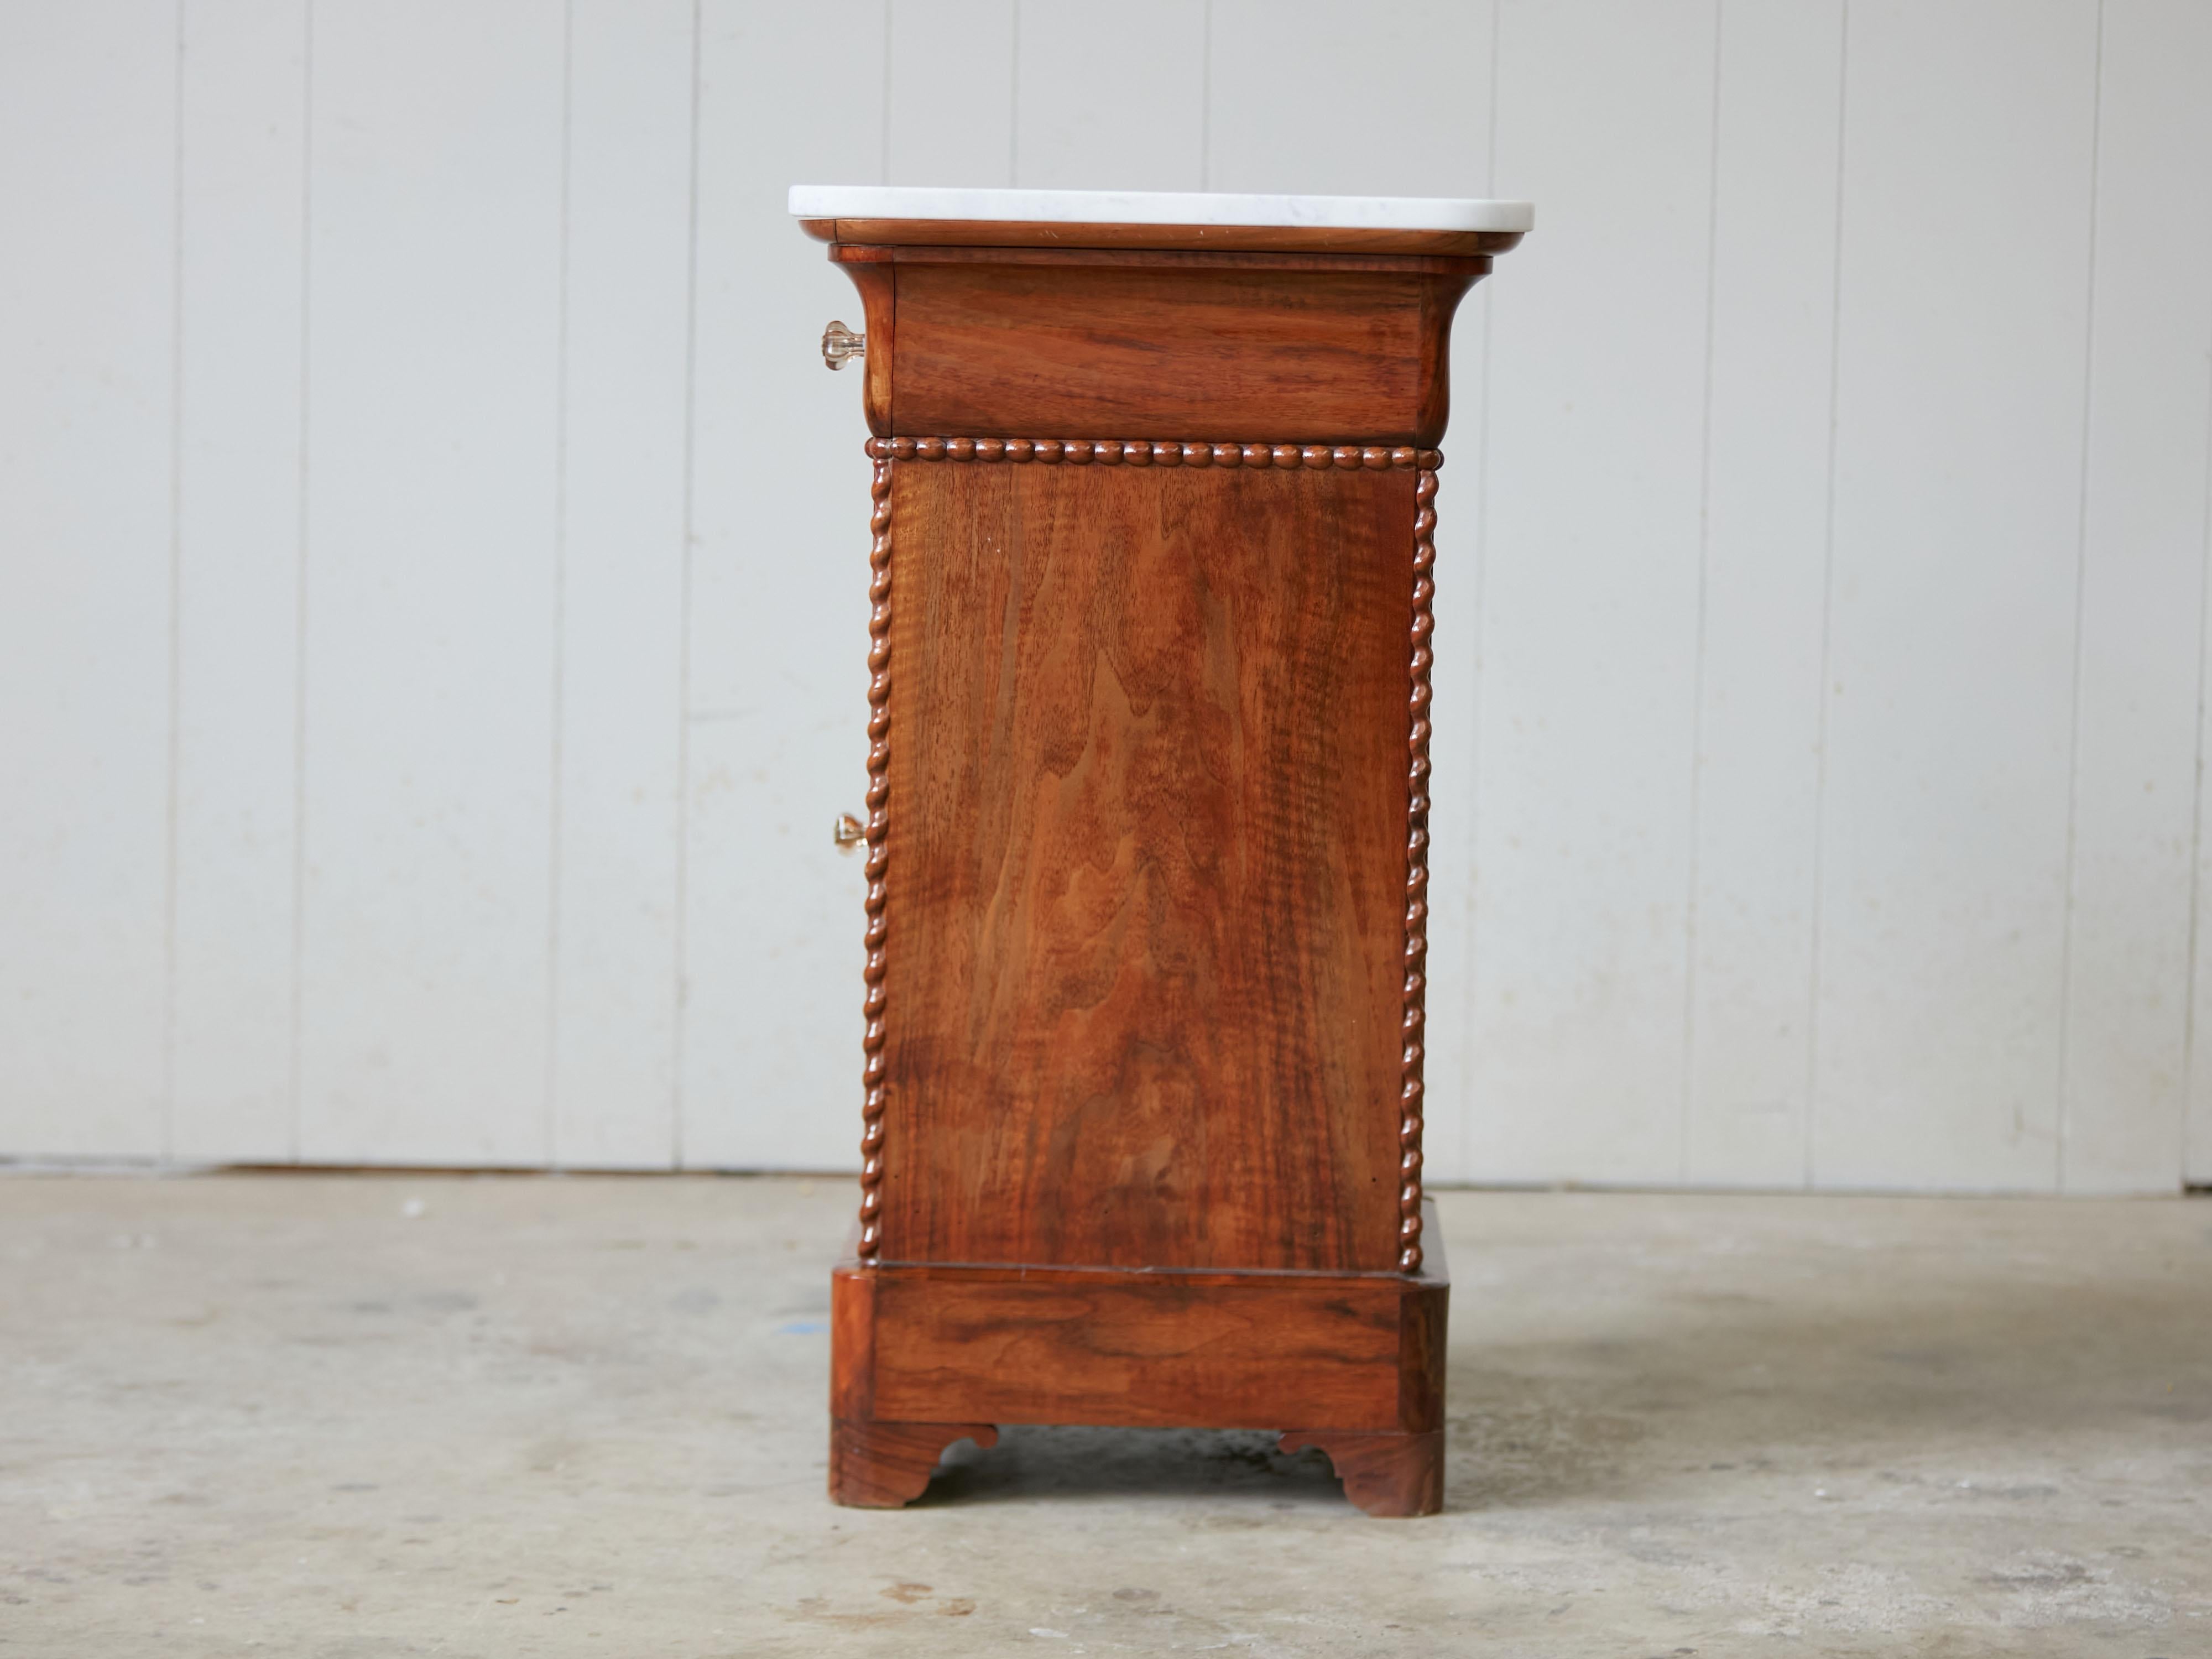 20th Century French Small Walnut Cabinet with White Marble Top and Single Drawer over Door